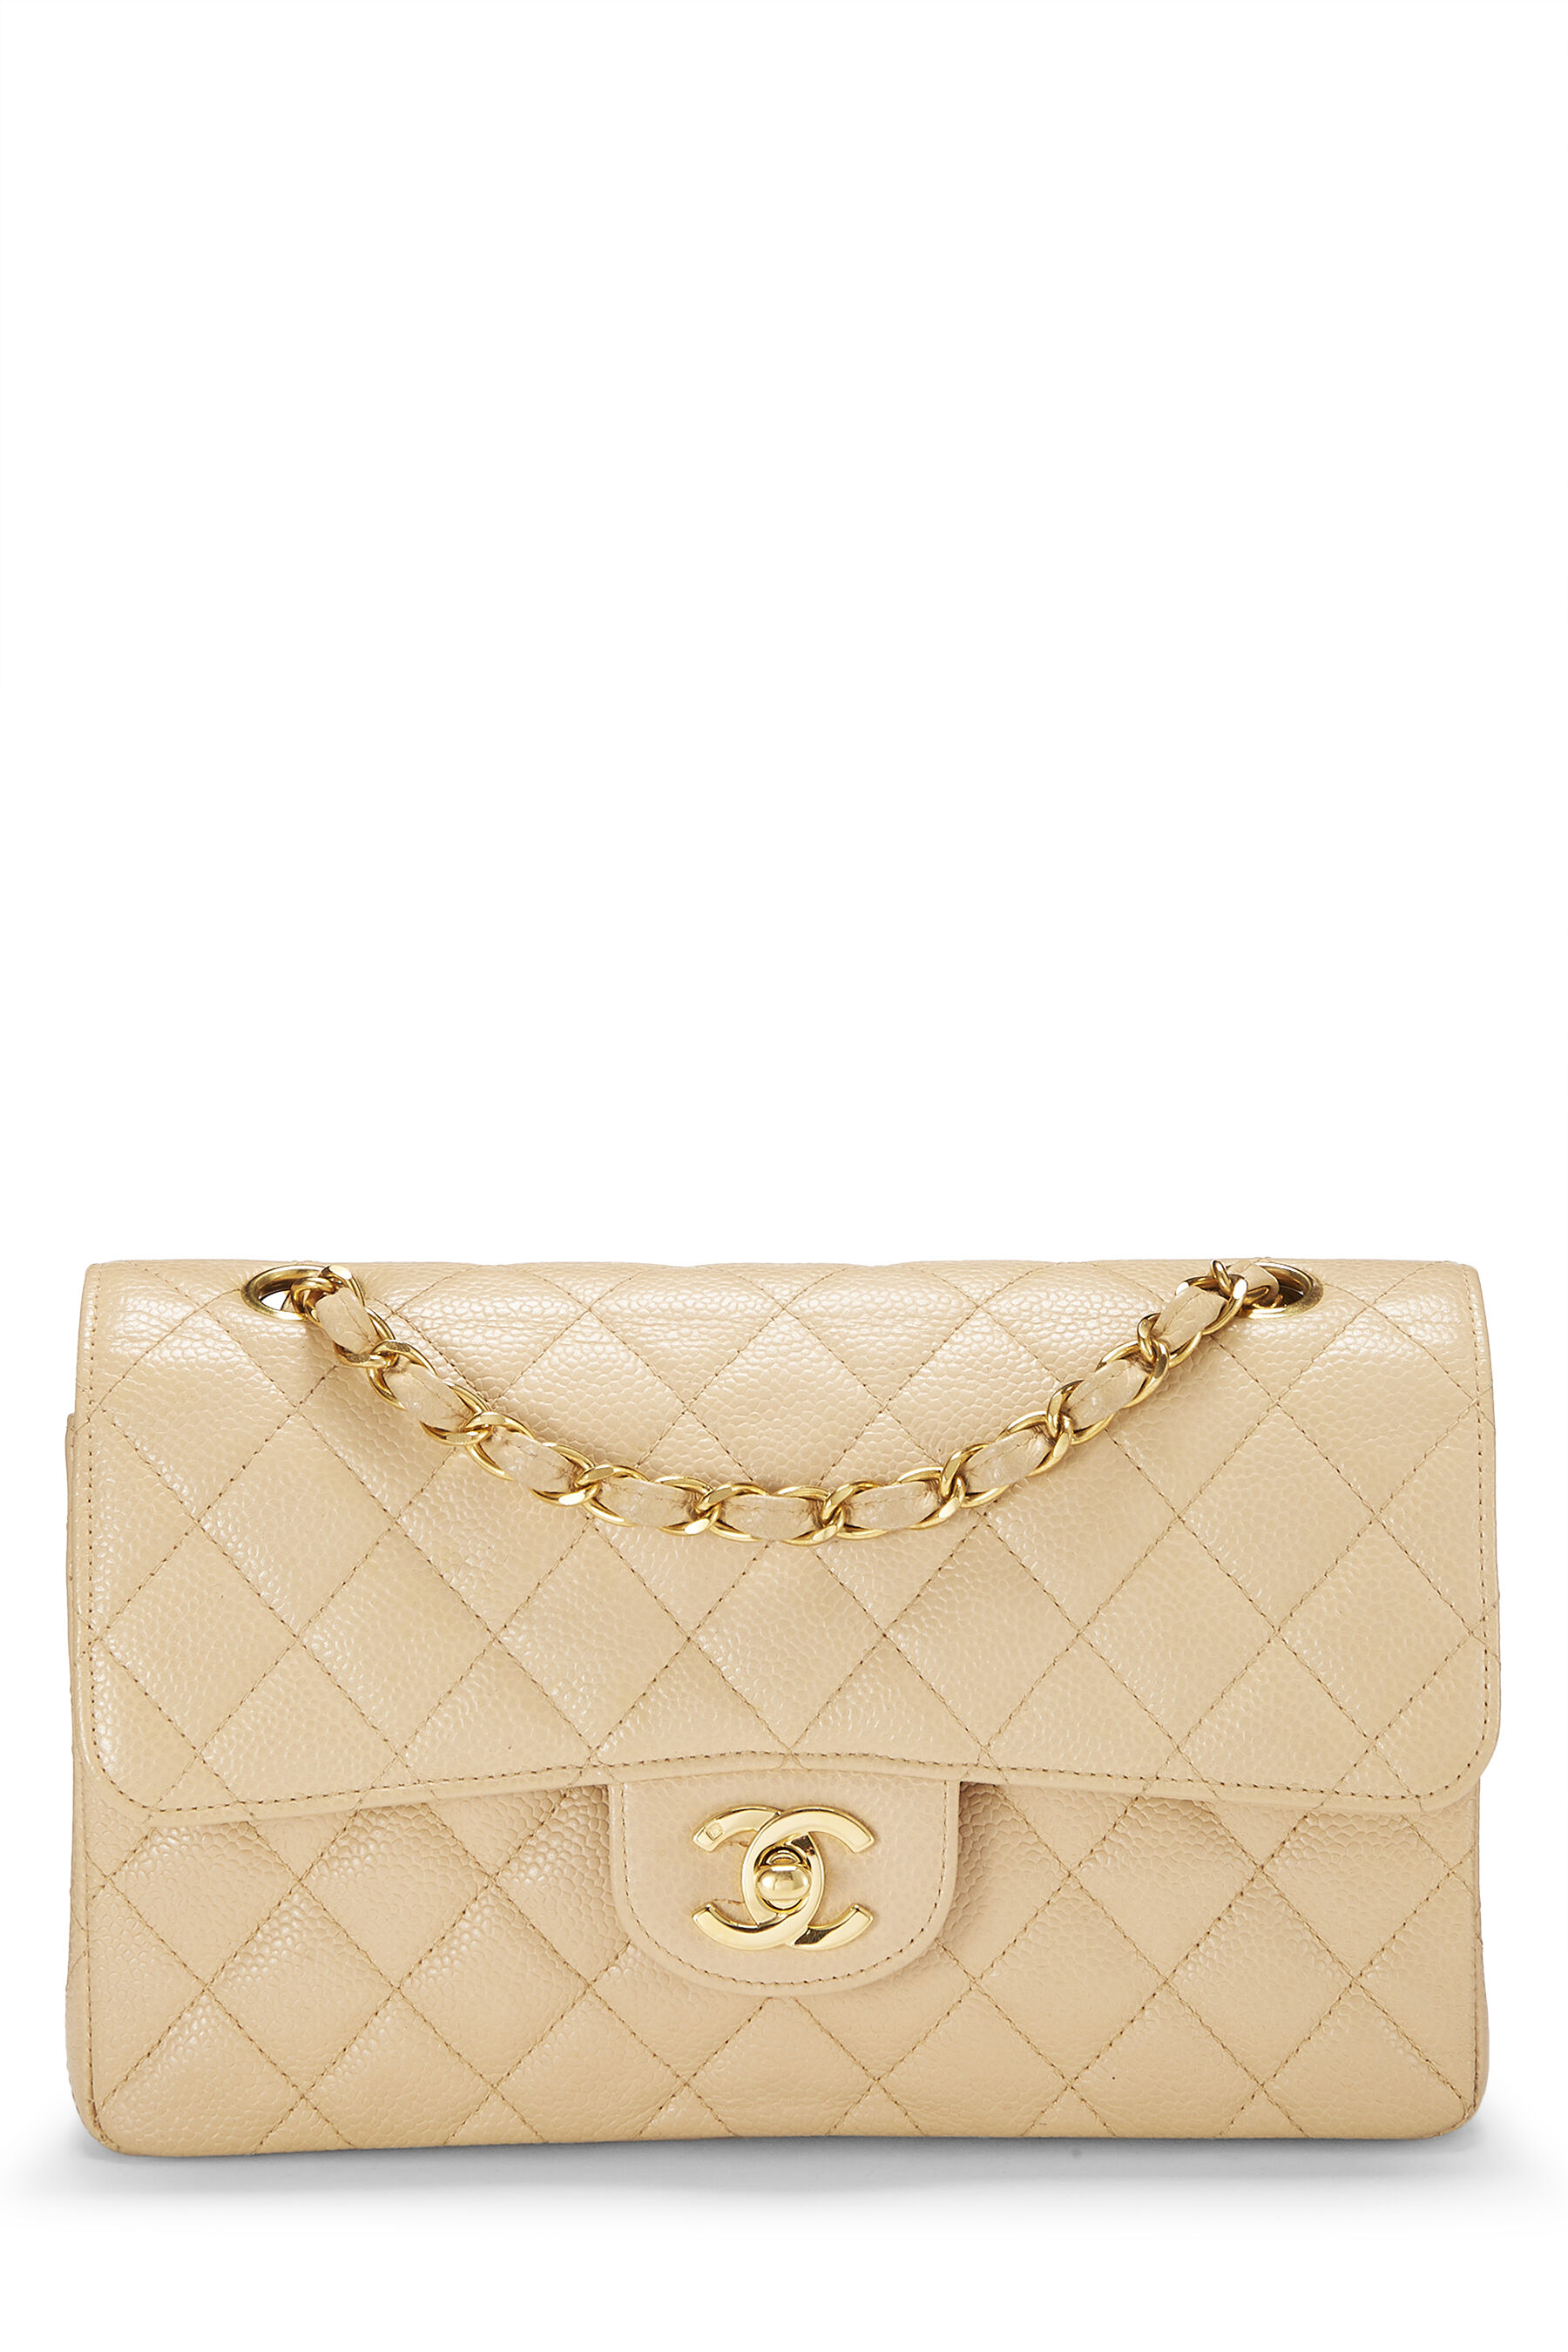 Chanel Beige Quilted Caviar Classic Double Flap Small Q6B0100FI1016